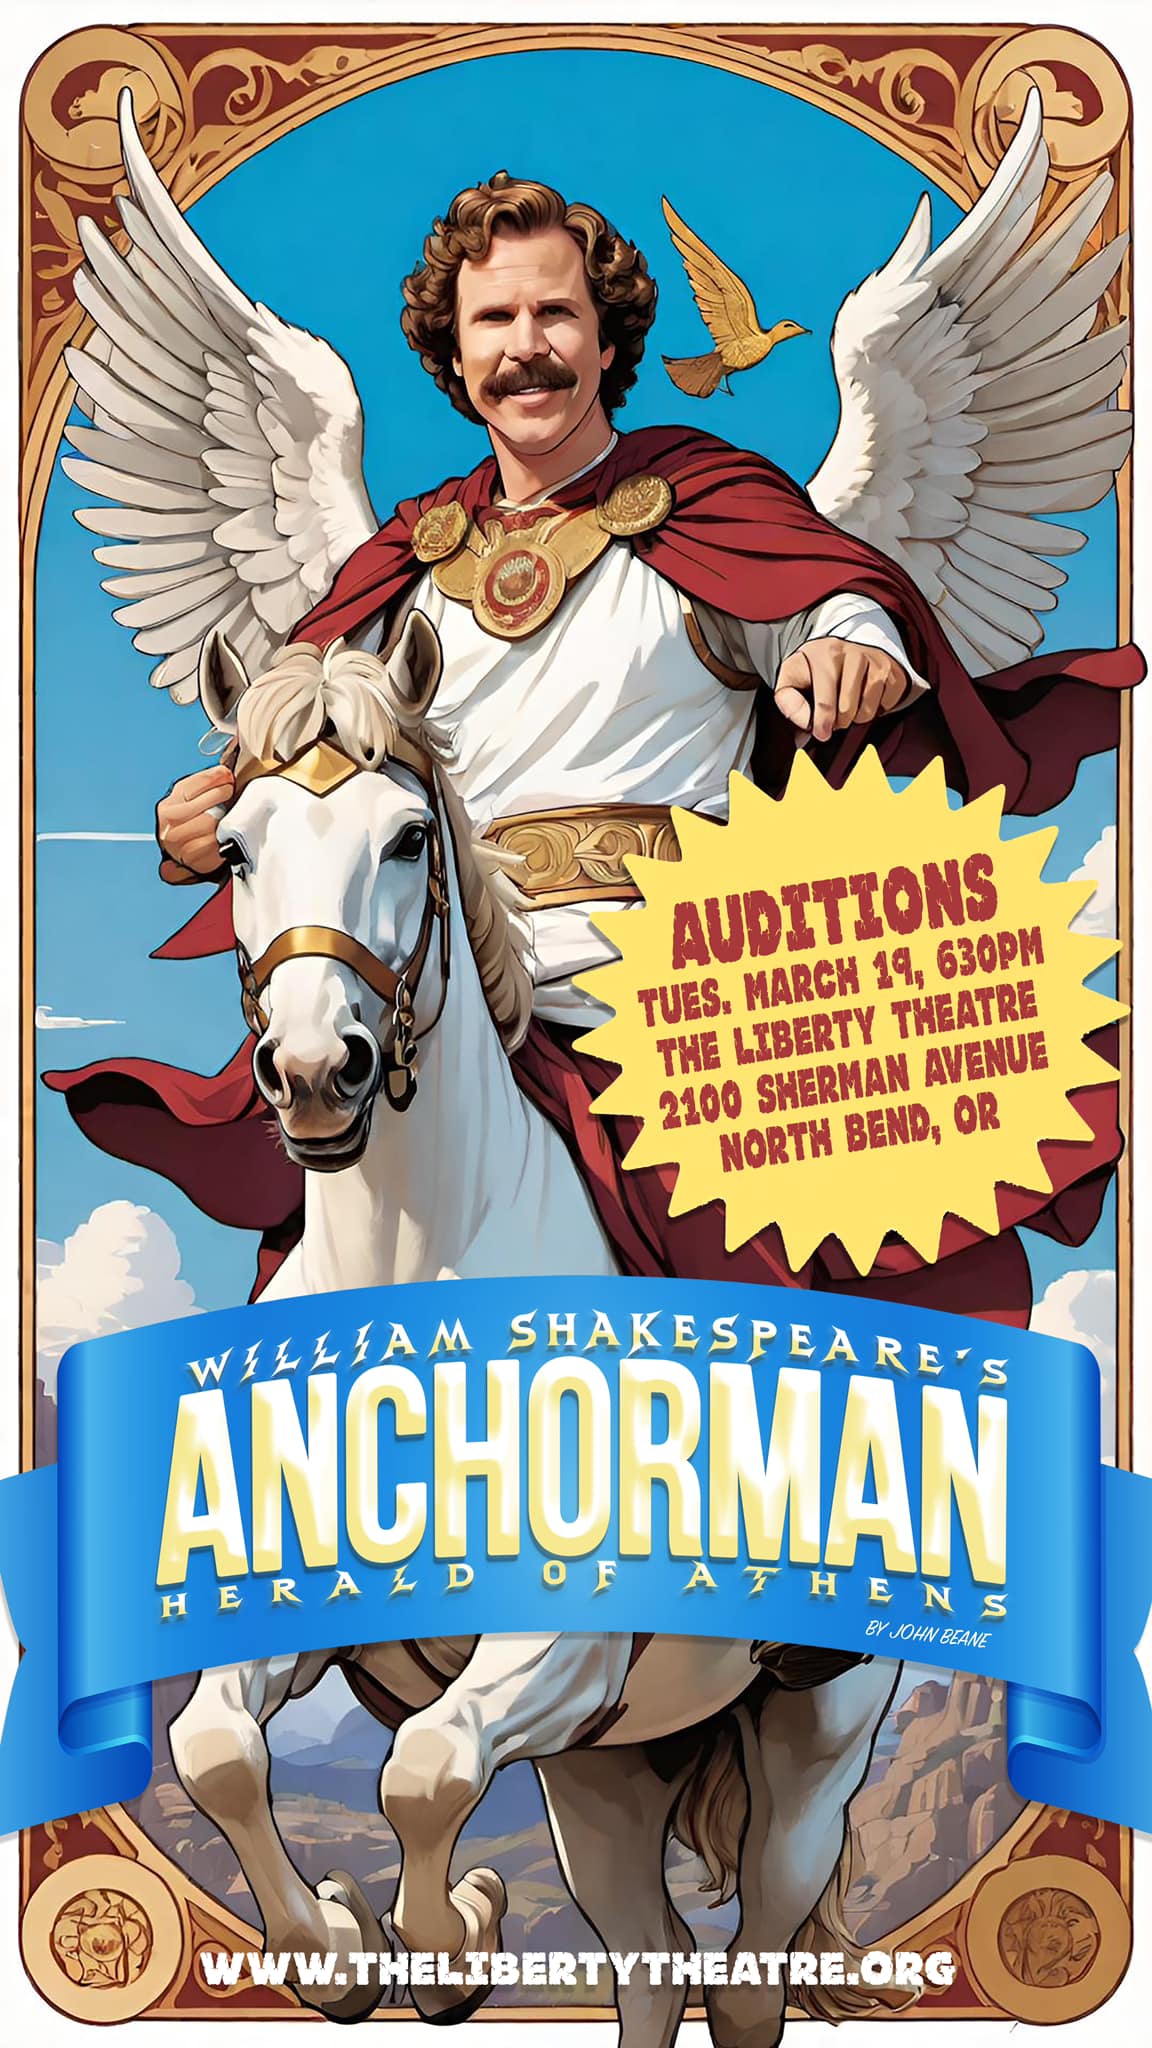 poster for William Shakespeare's Anchorman Herald of Athens